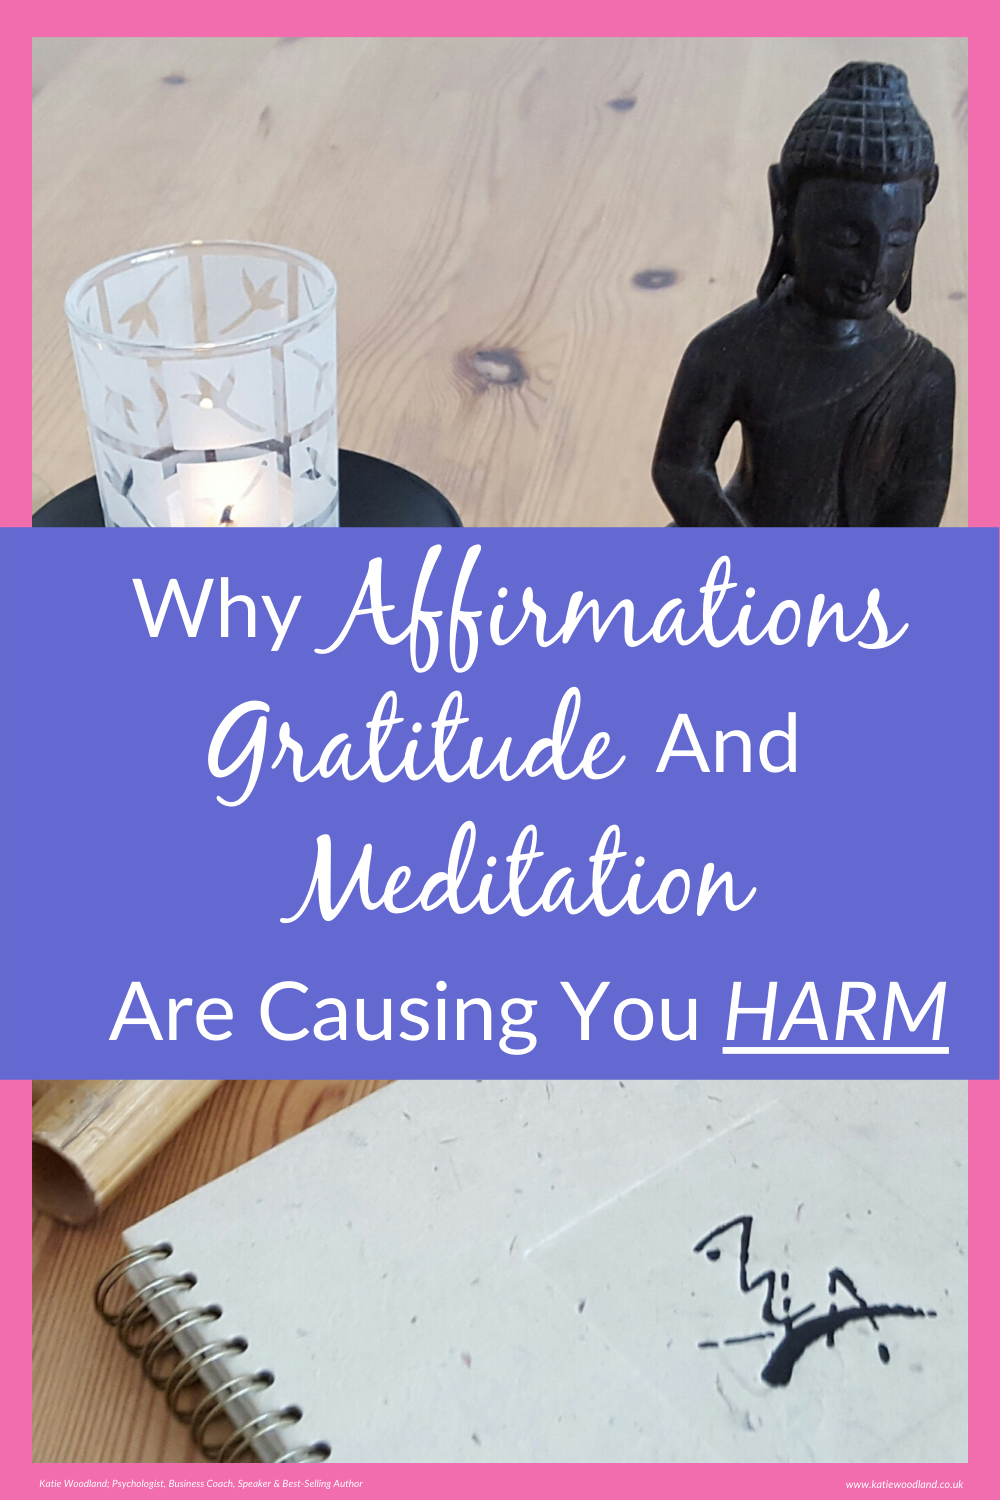 Why Affirmations, Gratitude And Meditation Are Causing You HARM!